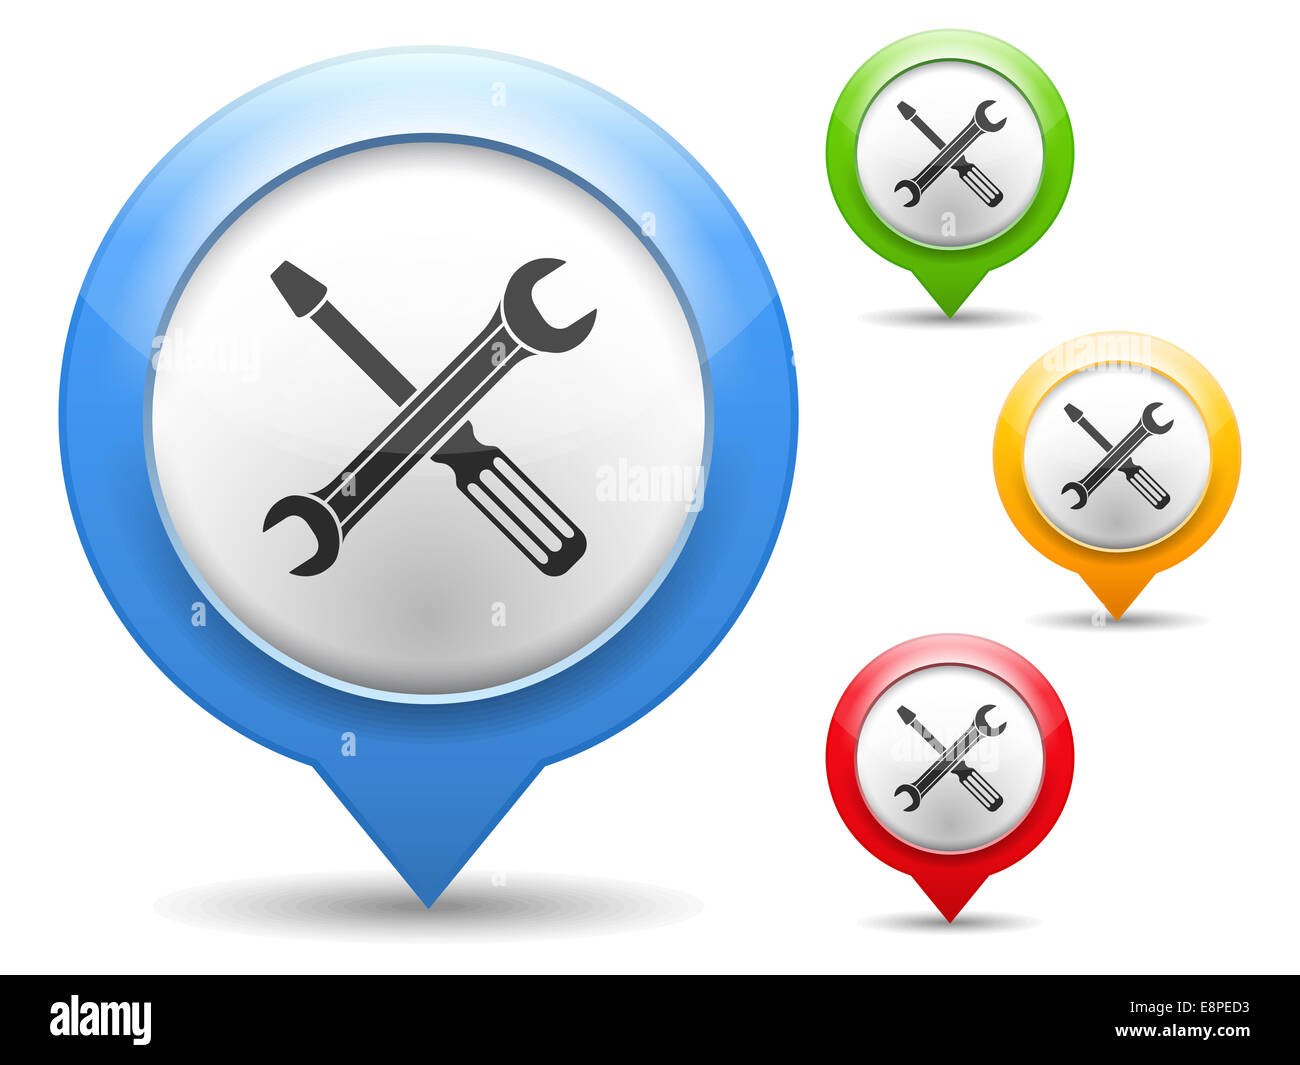 Screwdriver and wrench icon Stock Photo